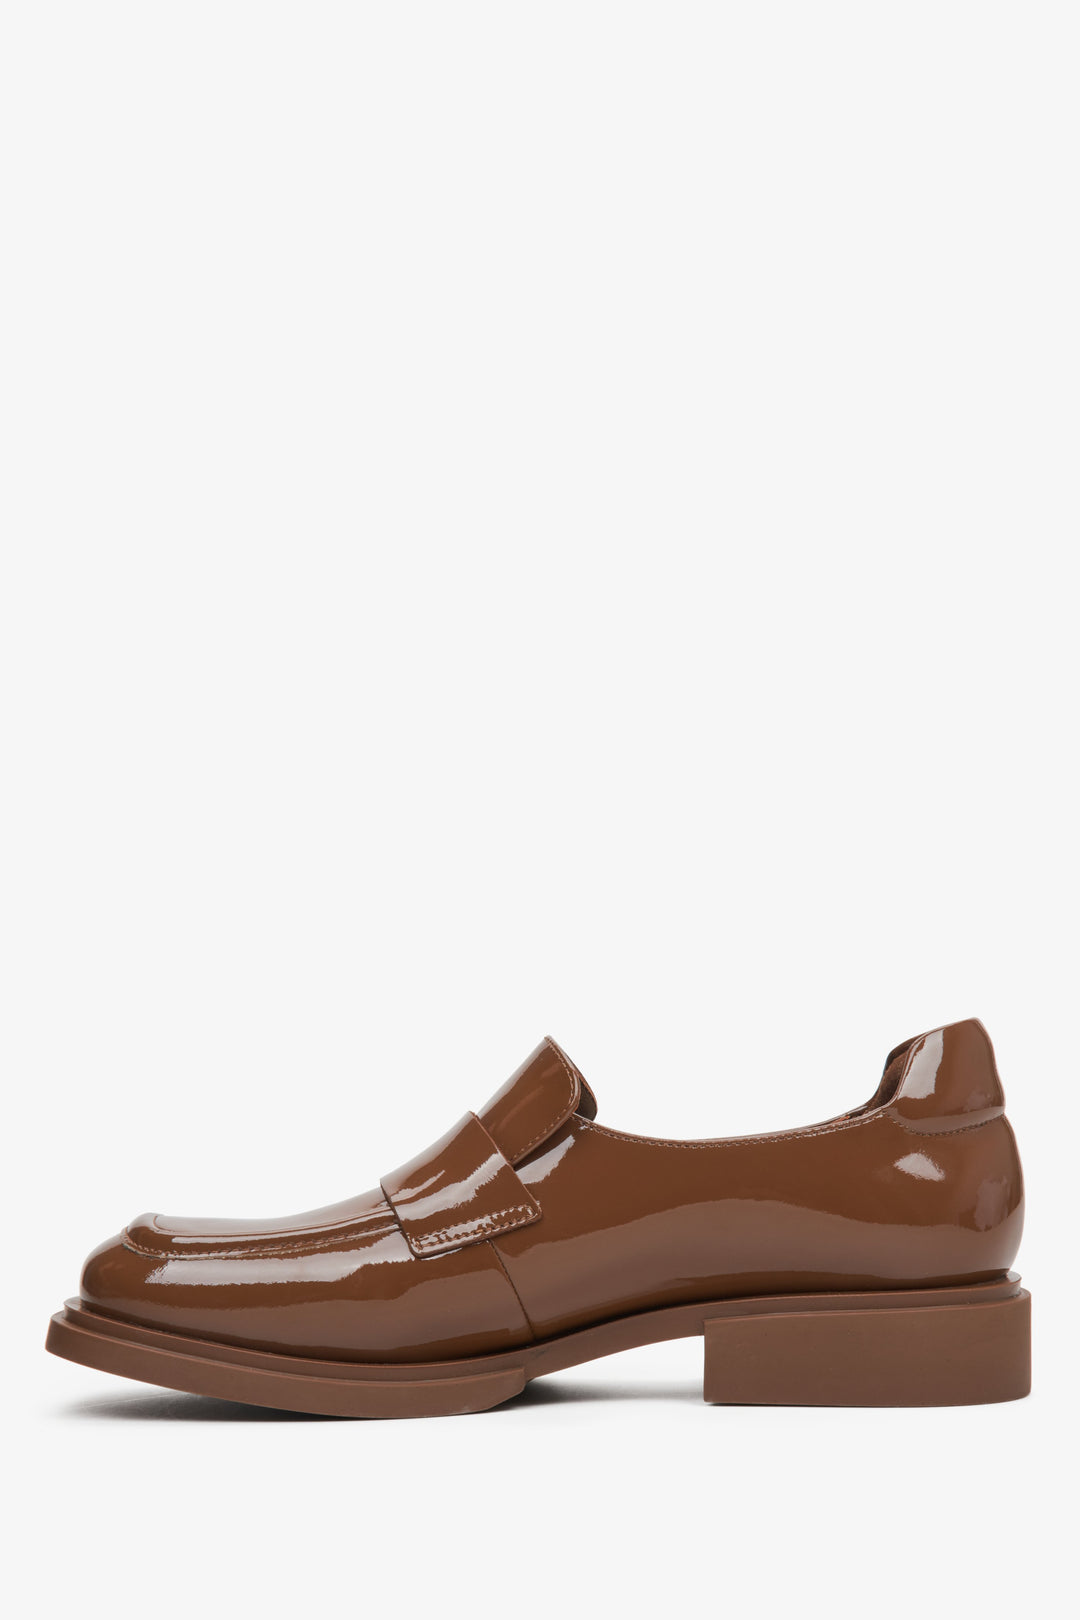 Women's brown moccasins with a square toe by Estro, made of patent genuine leather - shoe profile.